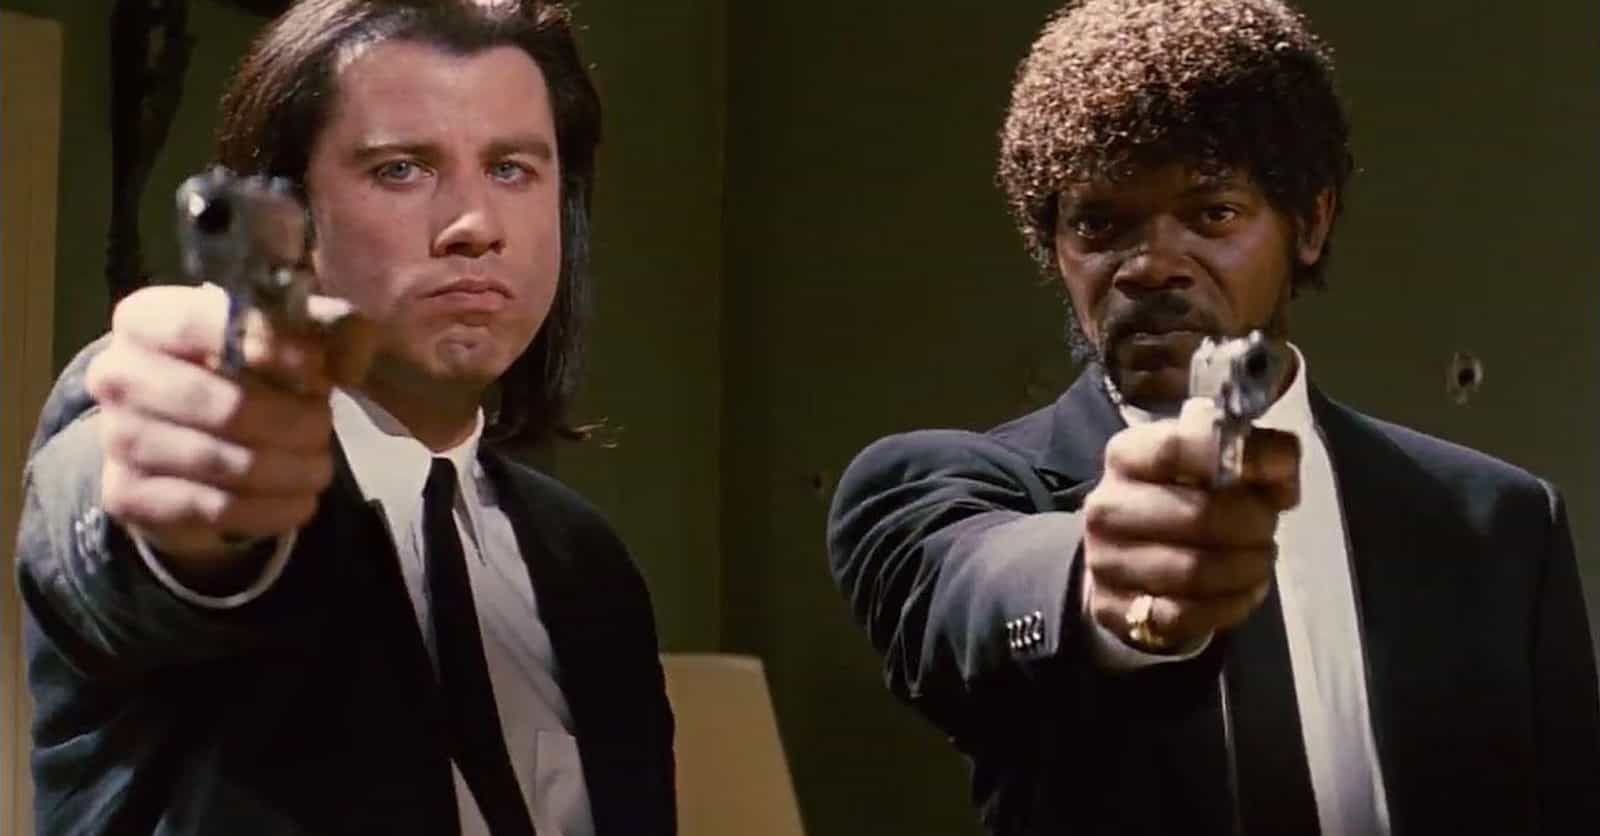 12 Behind-The-Scenes Stories From 'Pulp Fiction'